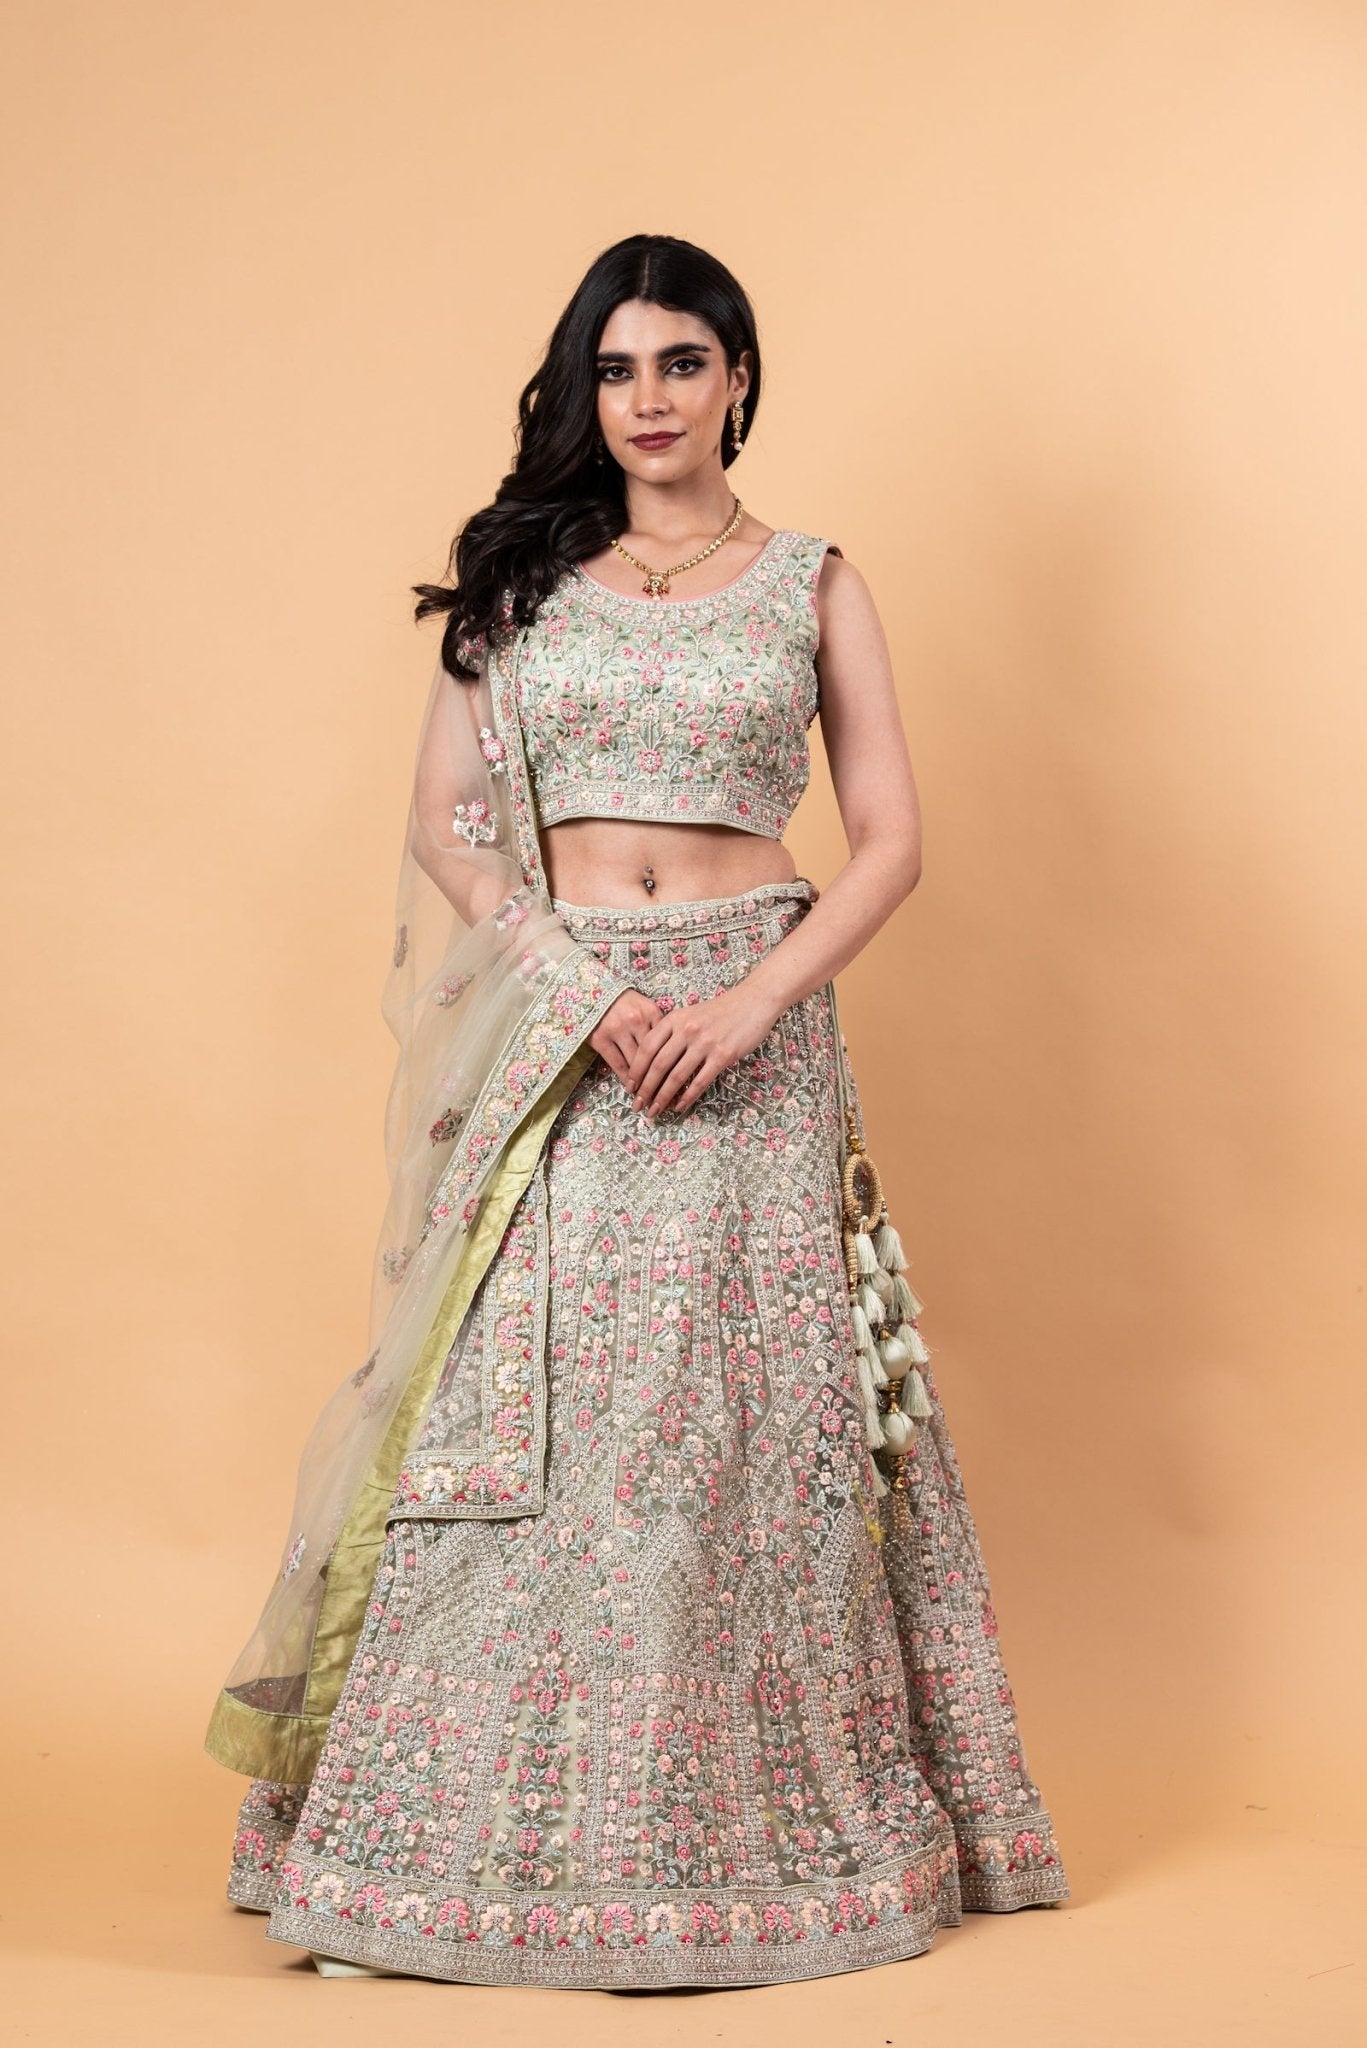 Stunning All Over Handwork Embroidered Net Pastel Lehenga and Choli With Tassel Dupatta - Anvi Couture